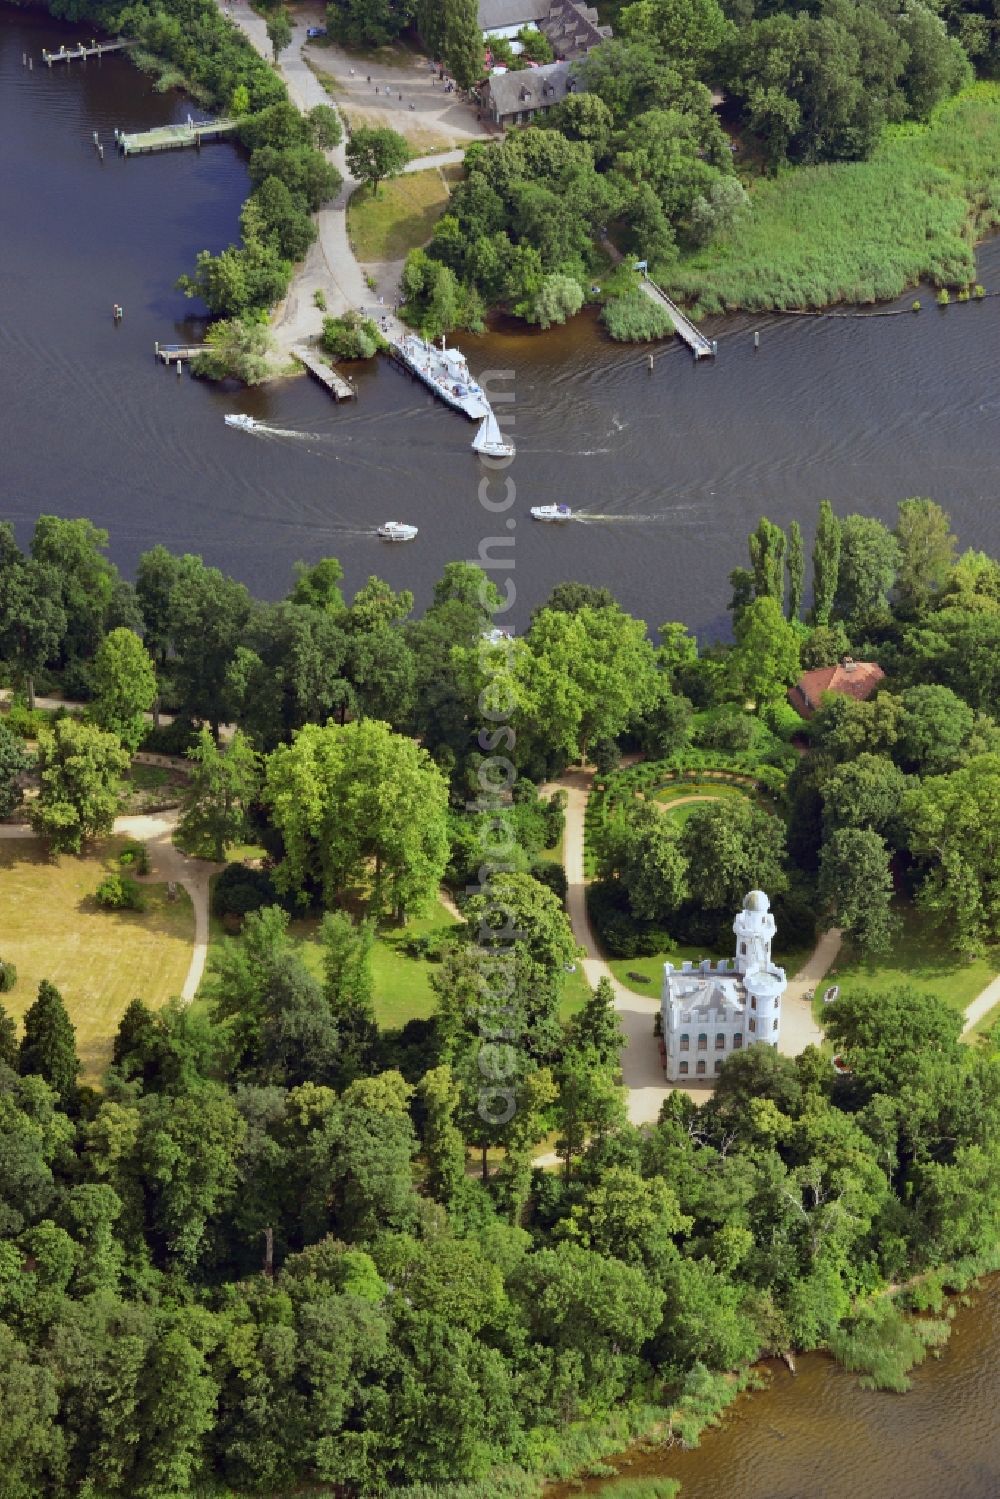 Aerial image Berlin - The Pfaueninsel Palace (peacock island) in the Wannsee part of the district of Steglitz - Zehlendorf in Berlin in the state of Brandenburg. The palace is located on the shore of the river Havel. It was built in the 18th century as a pleasure palace. It was designed in a romantic ruin architecture style and is surrounded by park like landscape on the river. Today it is part of the Potsdam palace and park compound and part of UNESCO world heritage